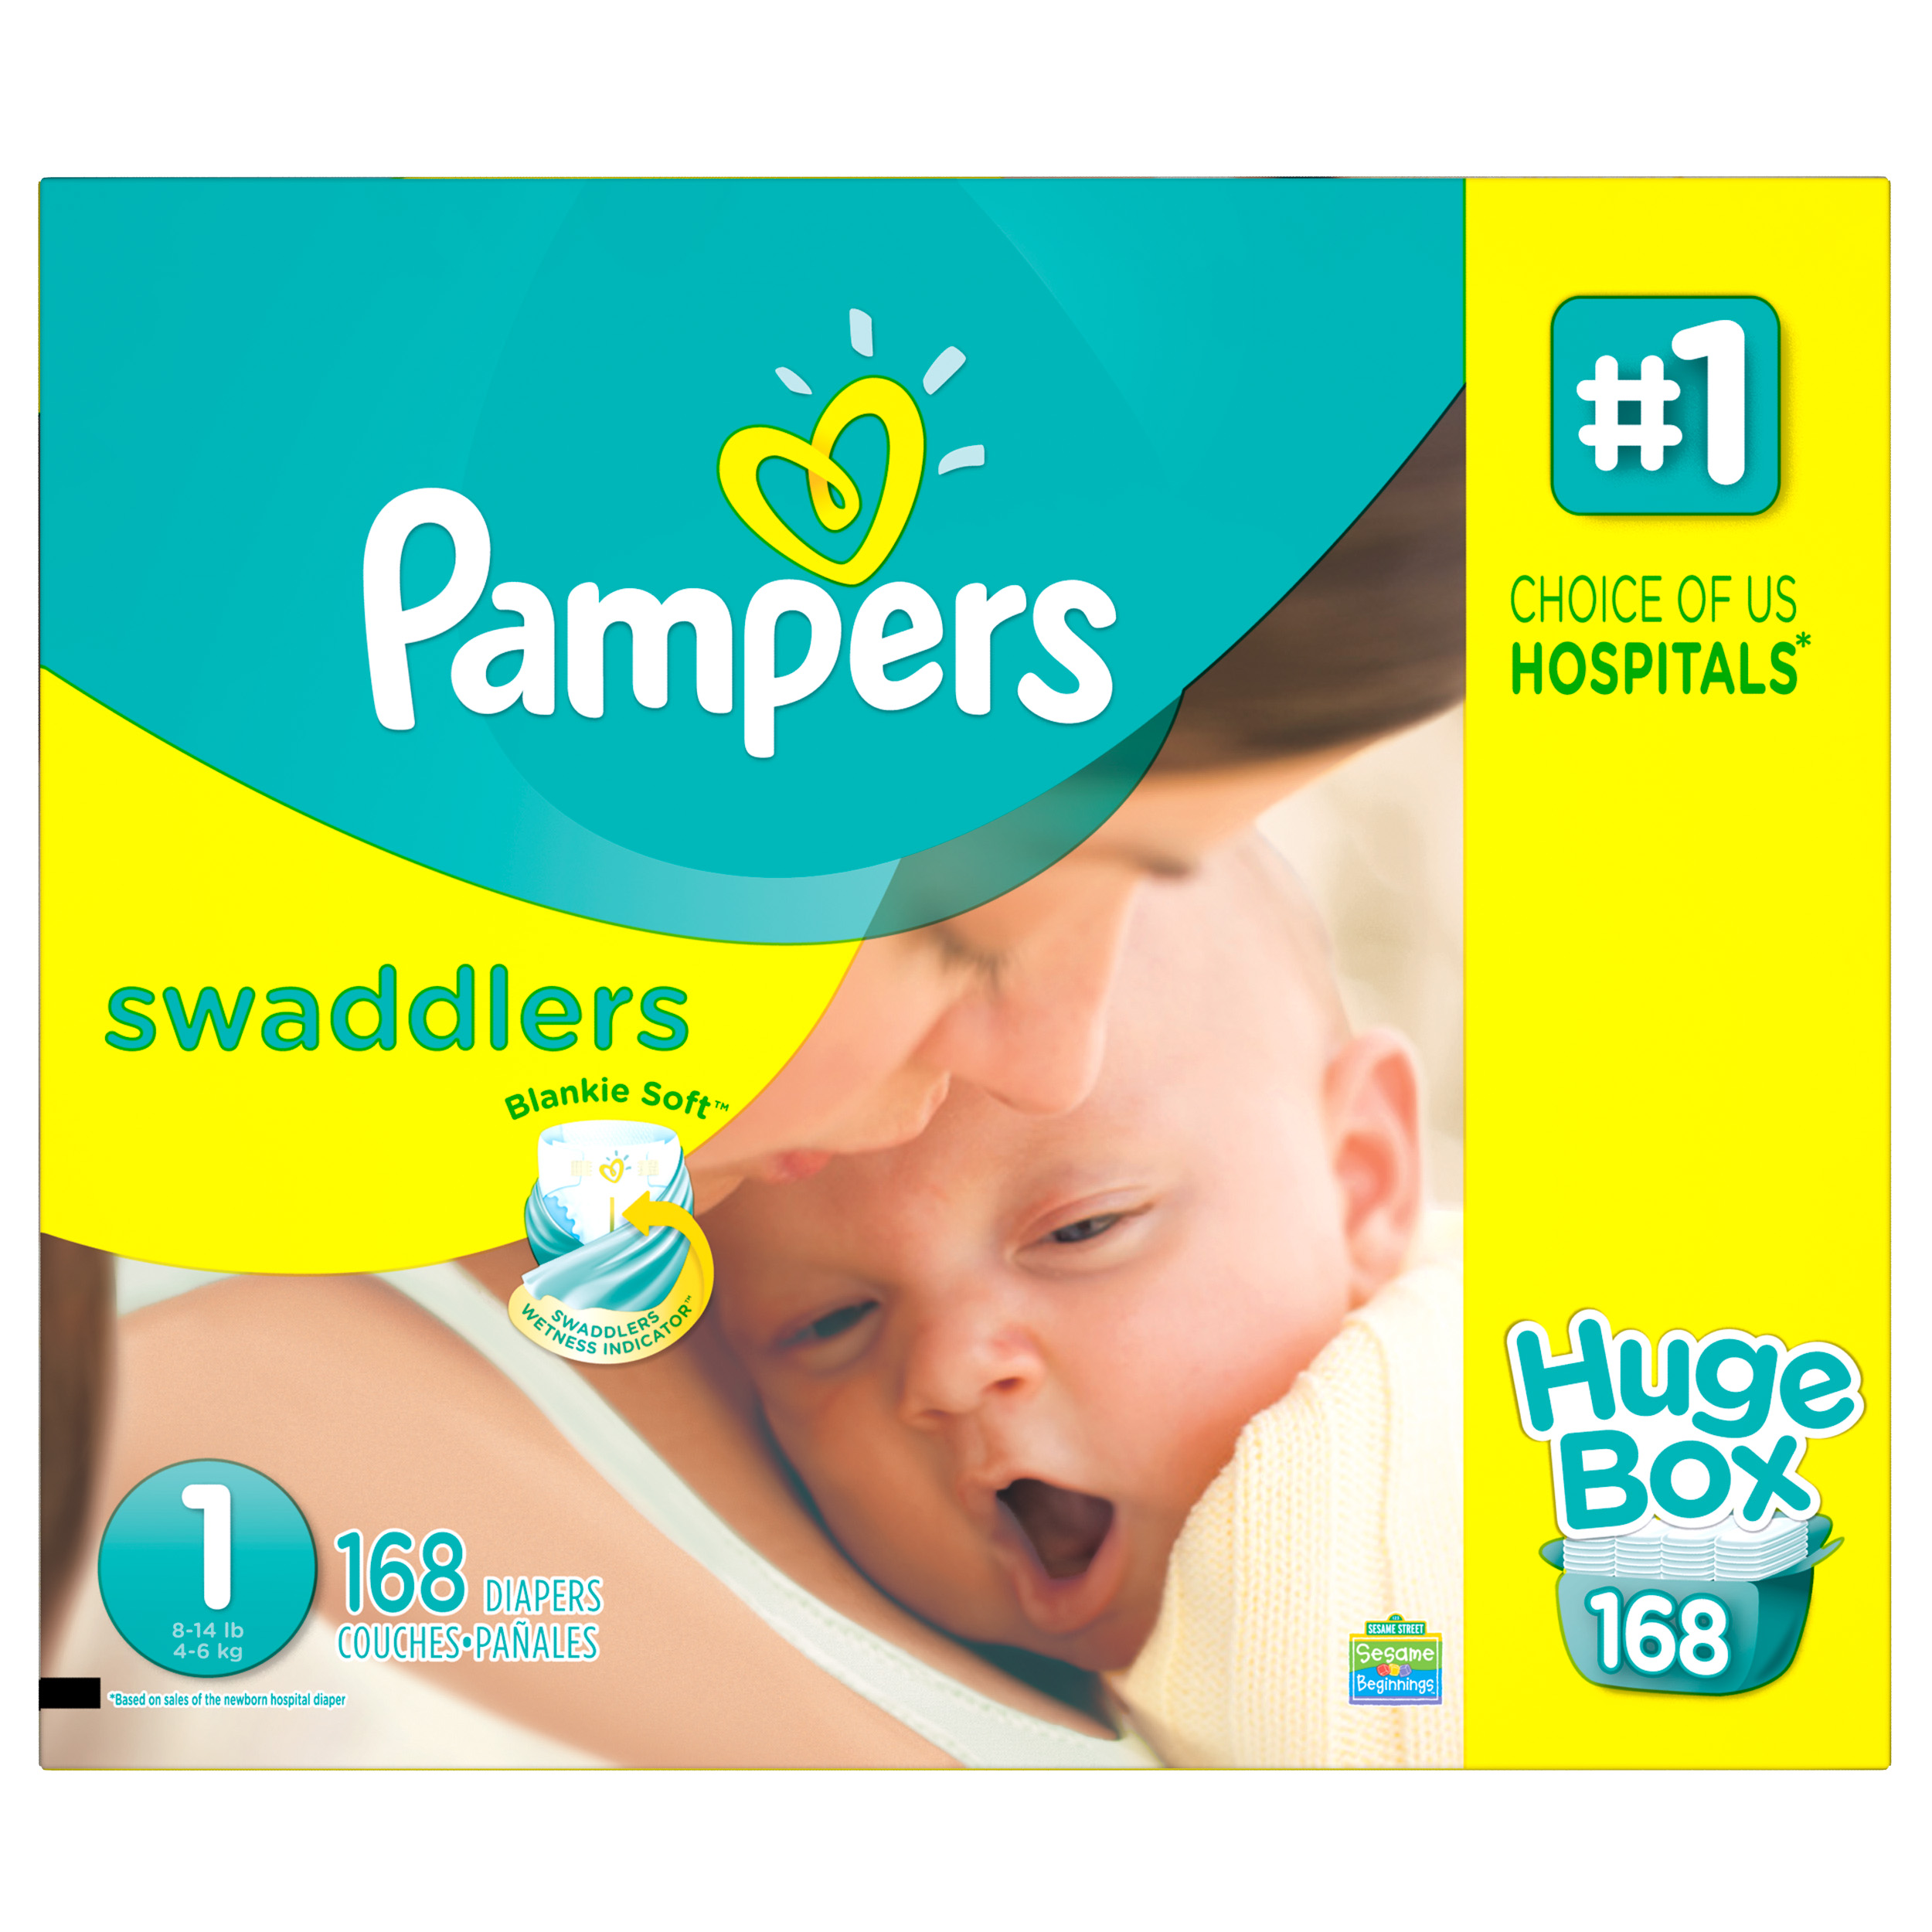 Pampers Swaddlers Soft and Absorbent Newborn Diapers, Size 1, 168 Ct - image 1 of 10